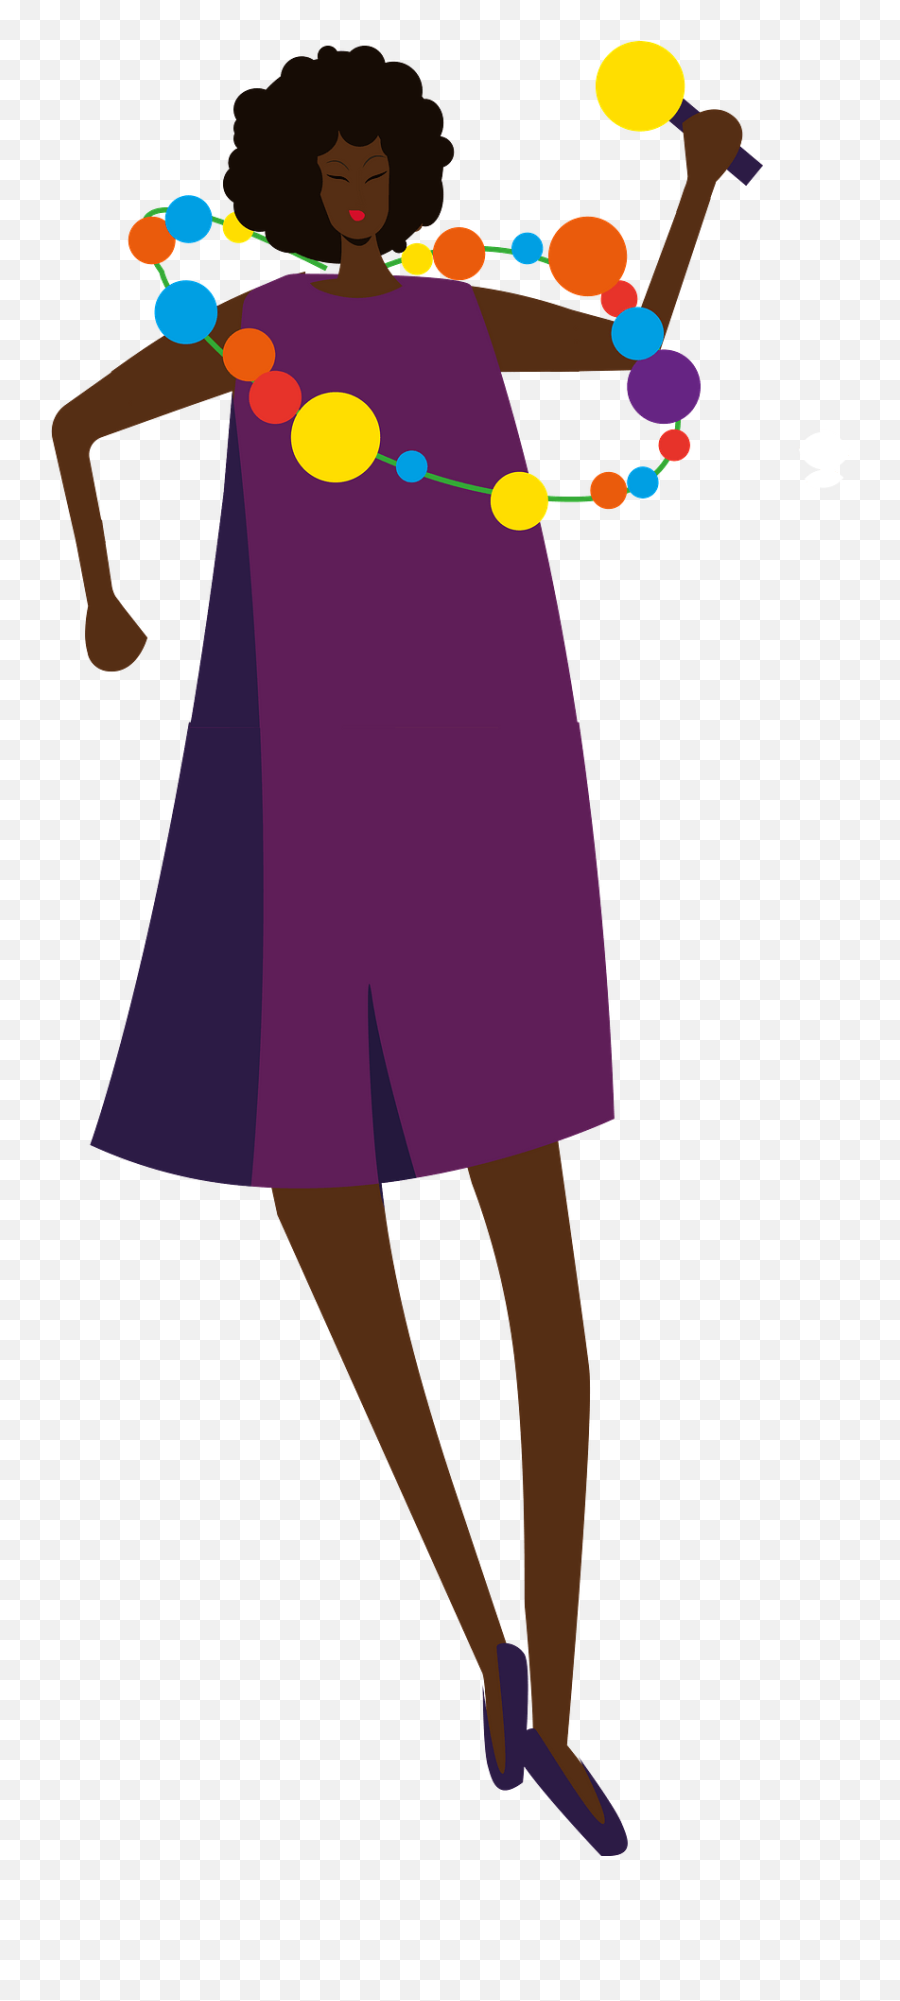 Black Woman With A Garland Clipart Free Download - Basic Dress Emoji,Black Woman Clipart